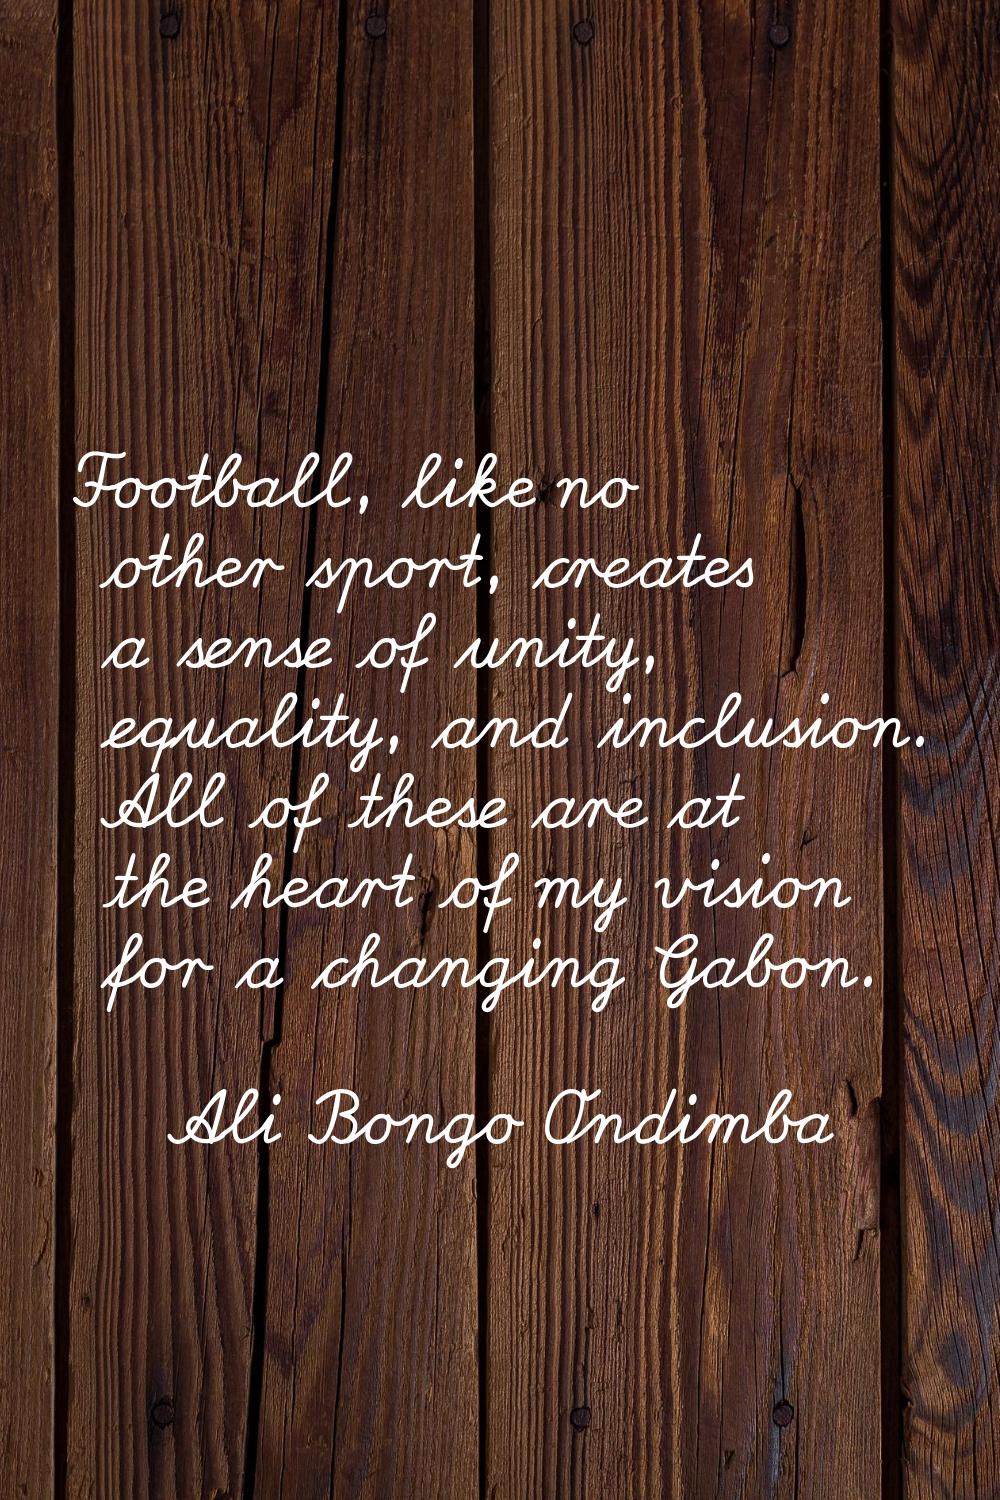 Football, like no other sport, creates a sense of unity, equality, and inclusion. All of these are 